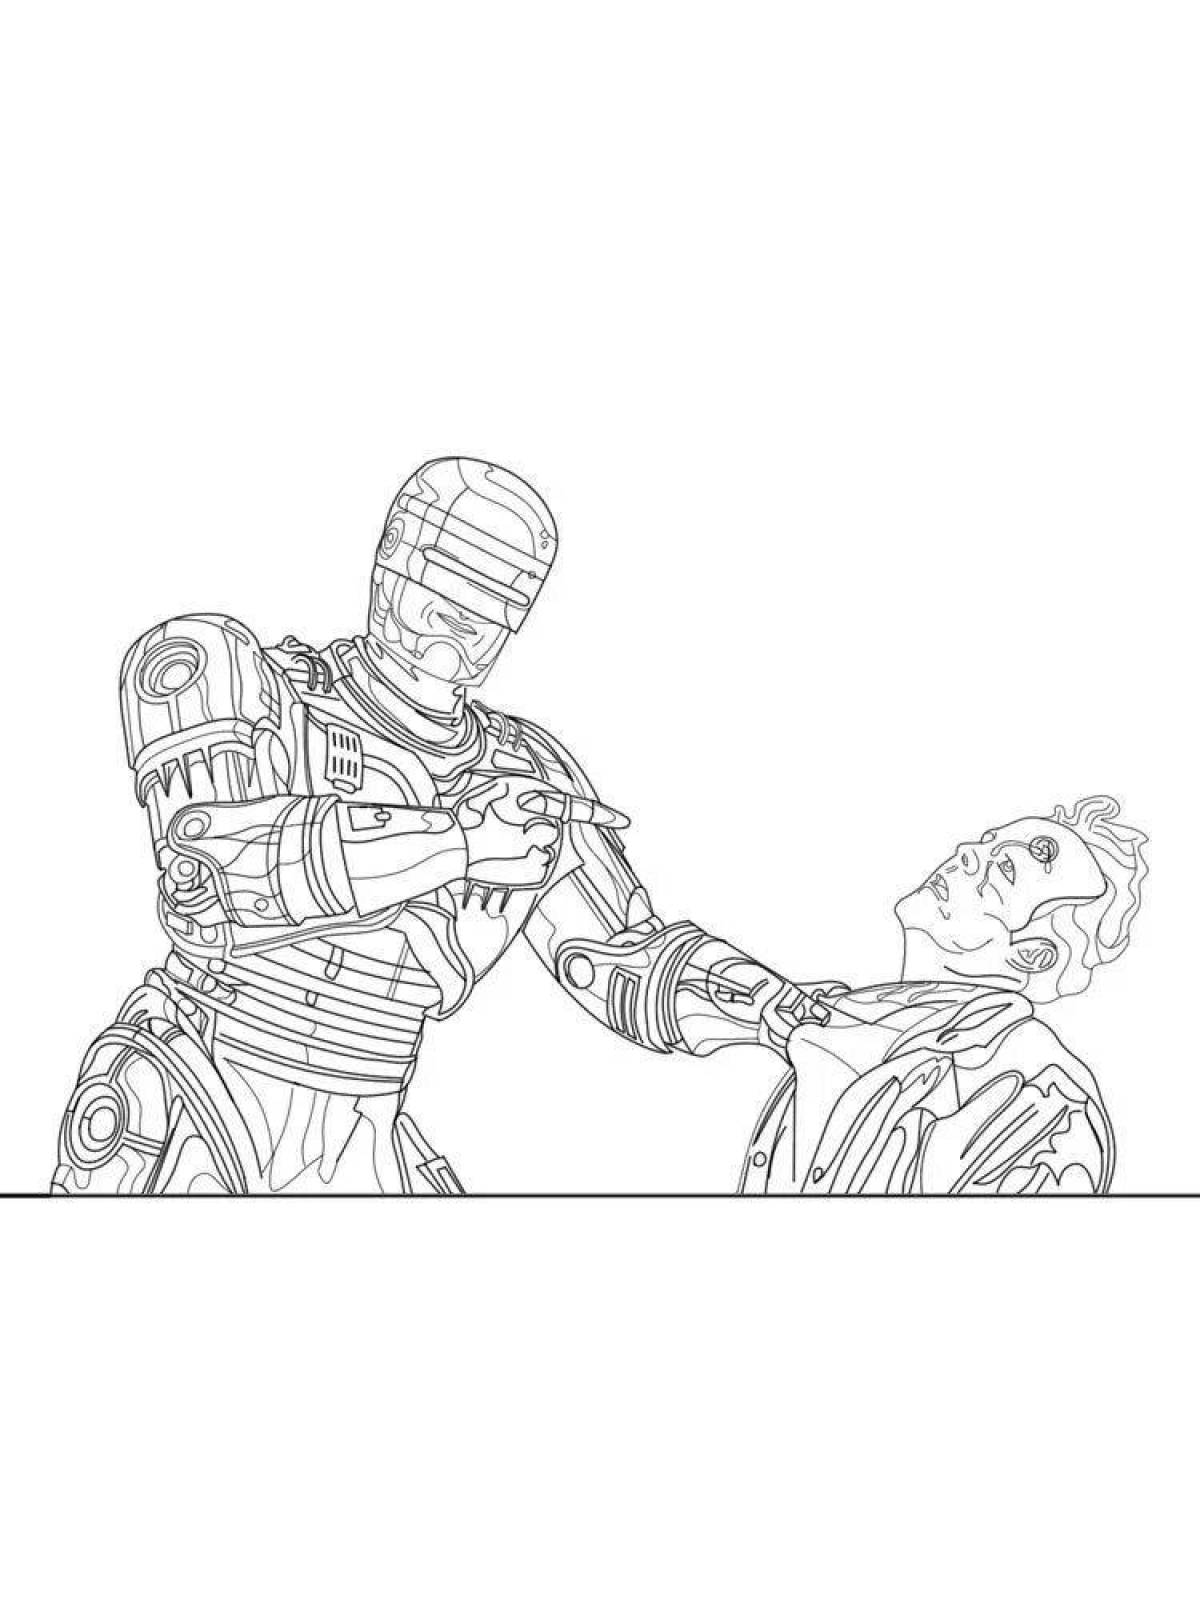 Glorious robocop coloring page